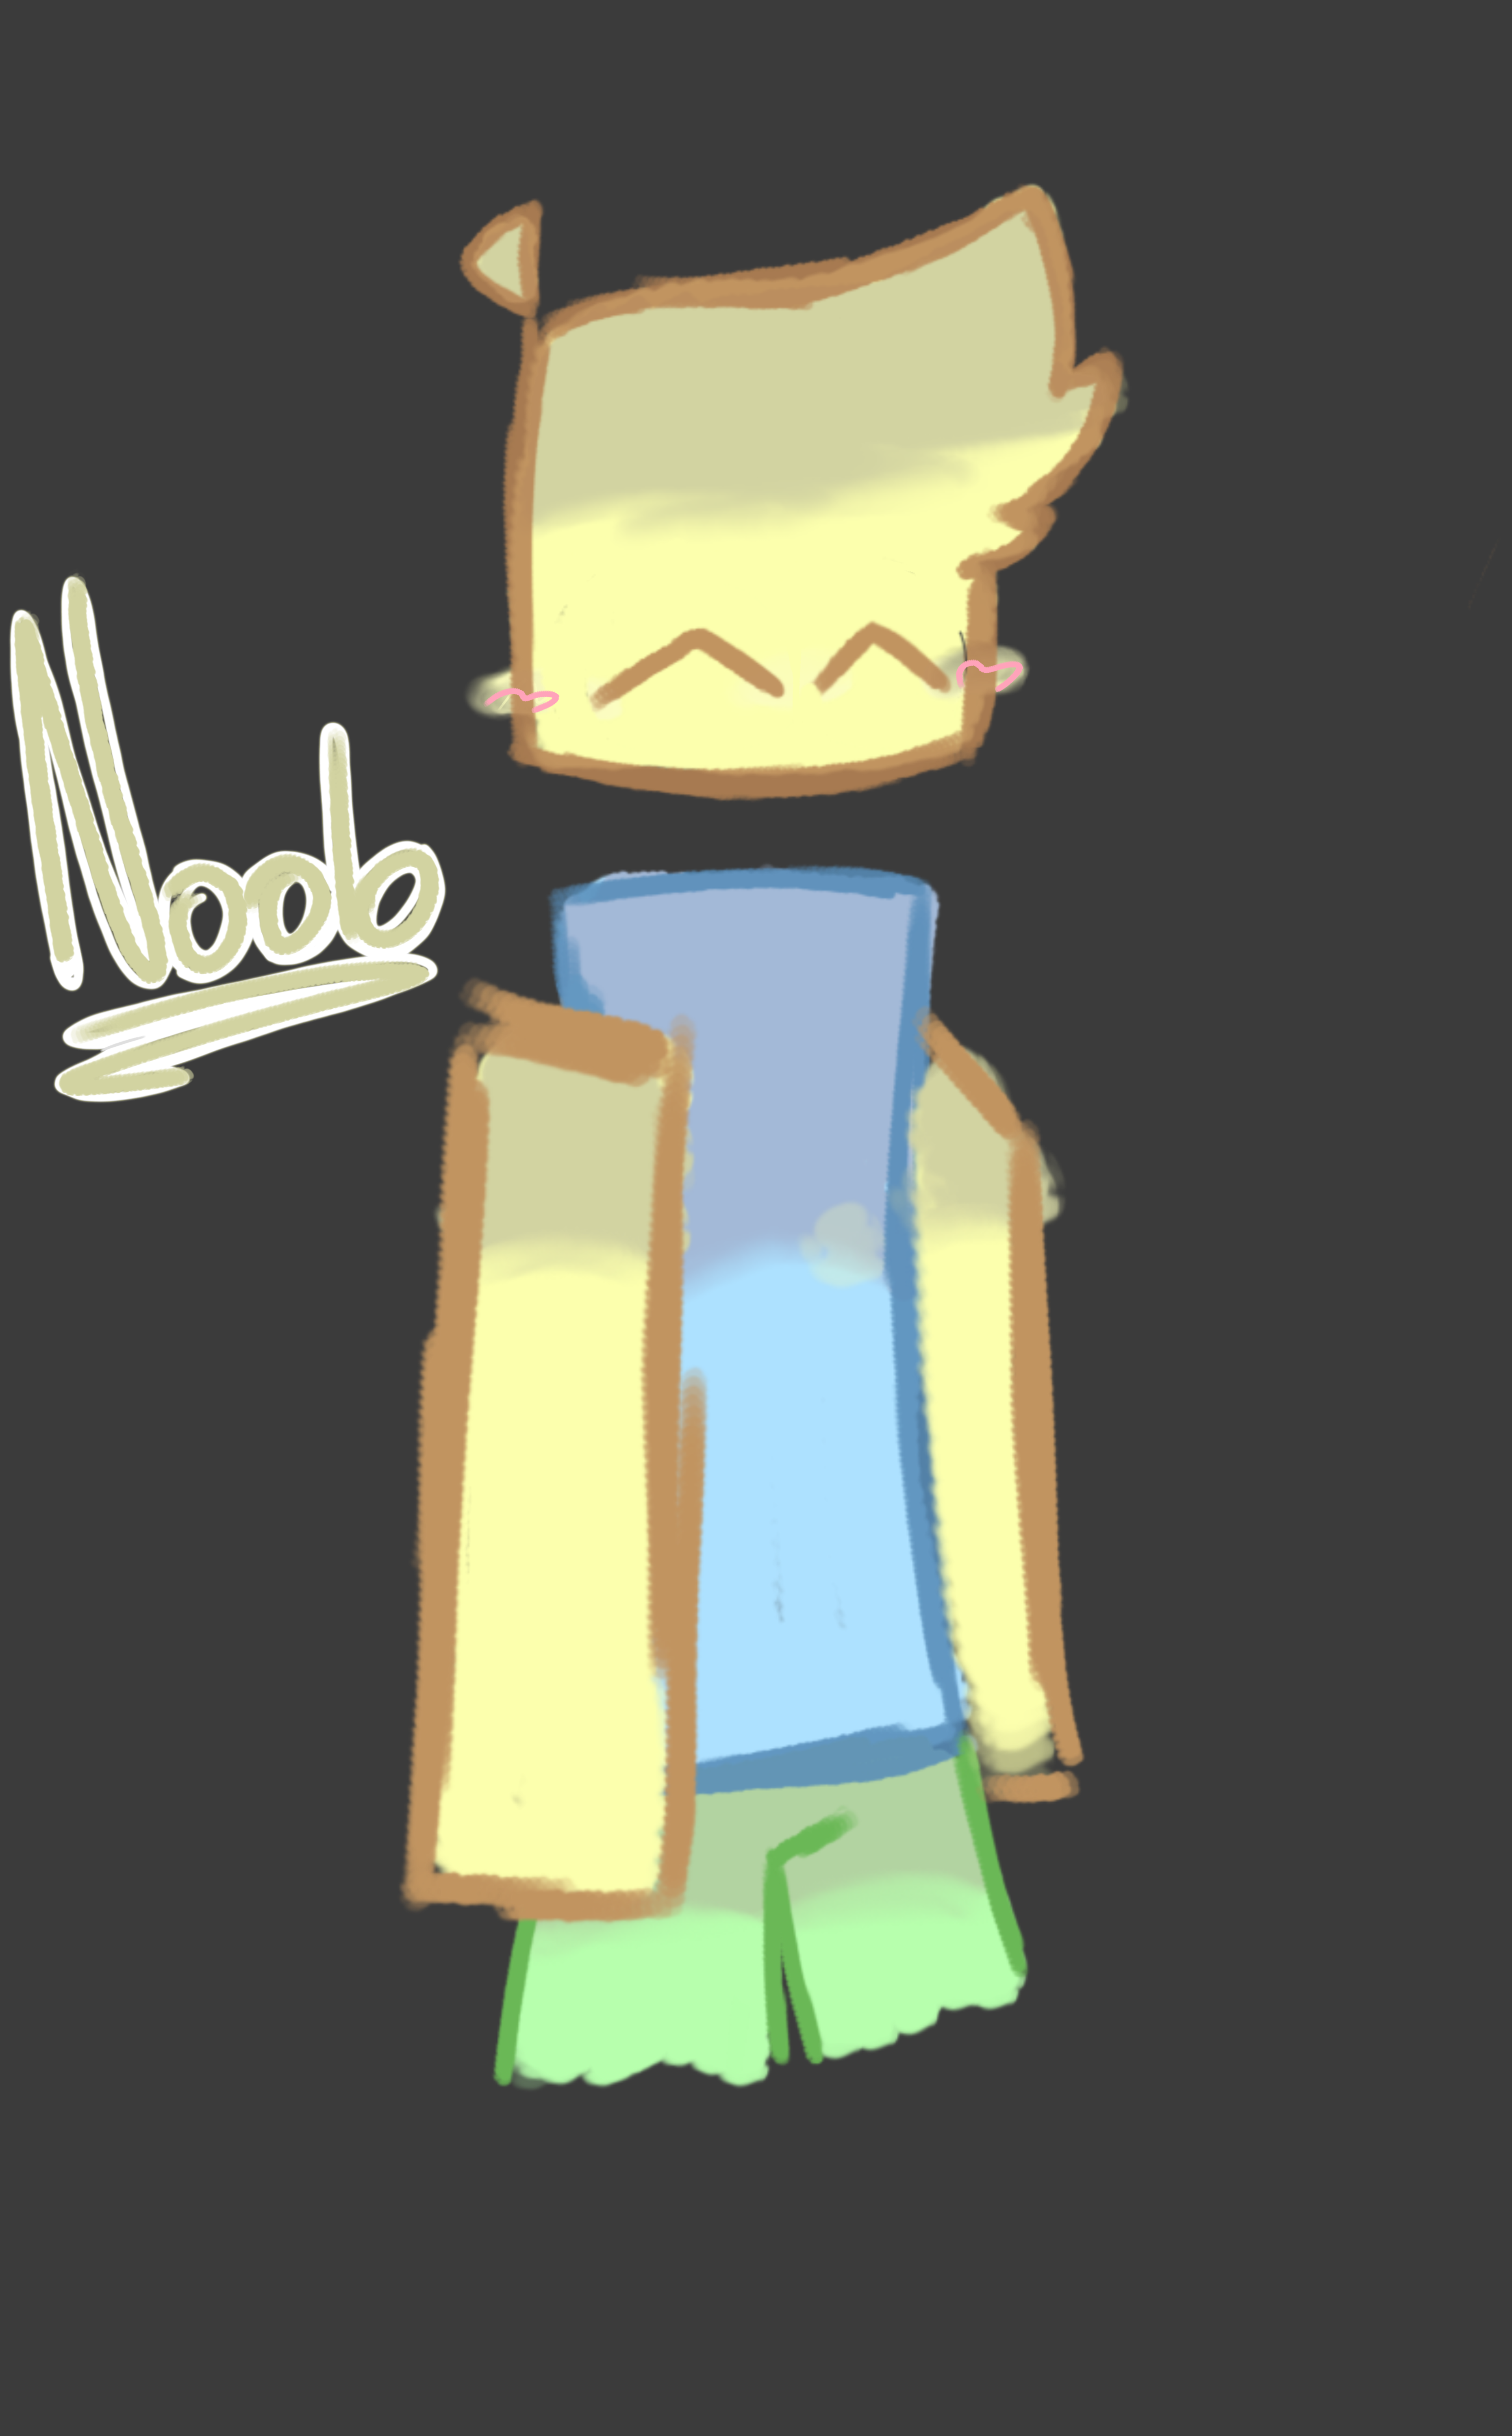 Noob Squad (Roblox FanArt) by AddictedToCoughDrops on DeviantArt